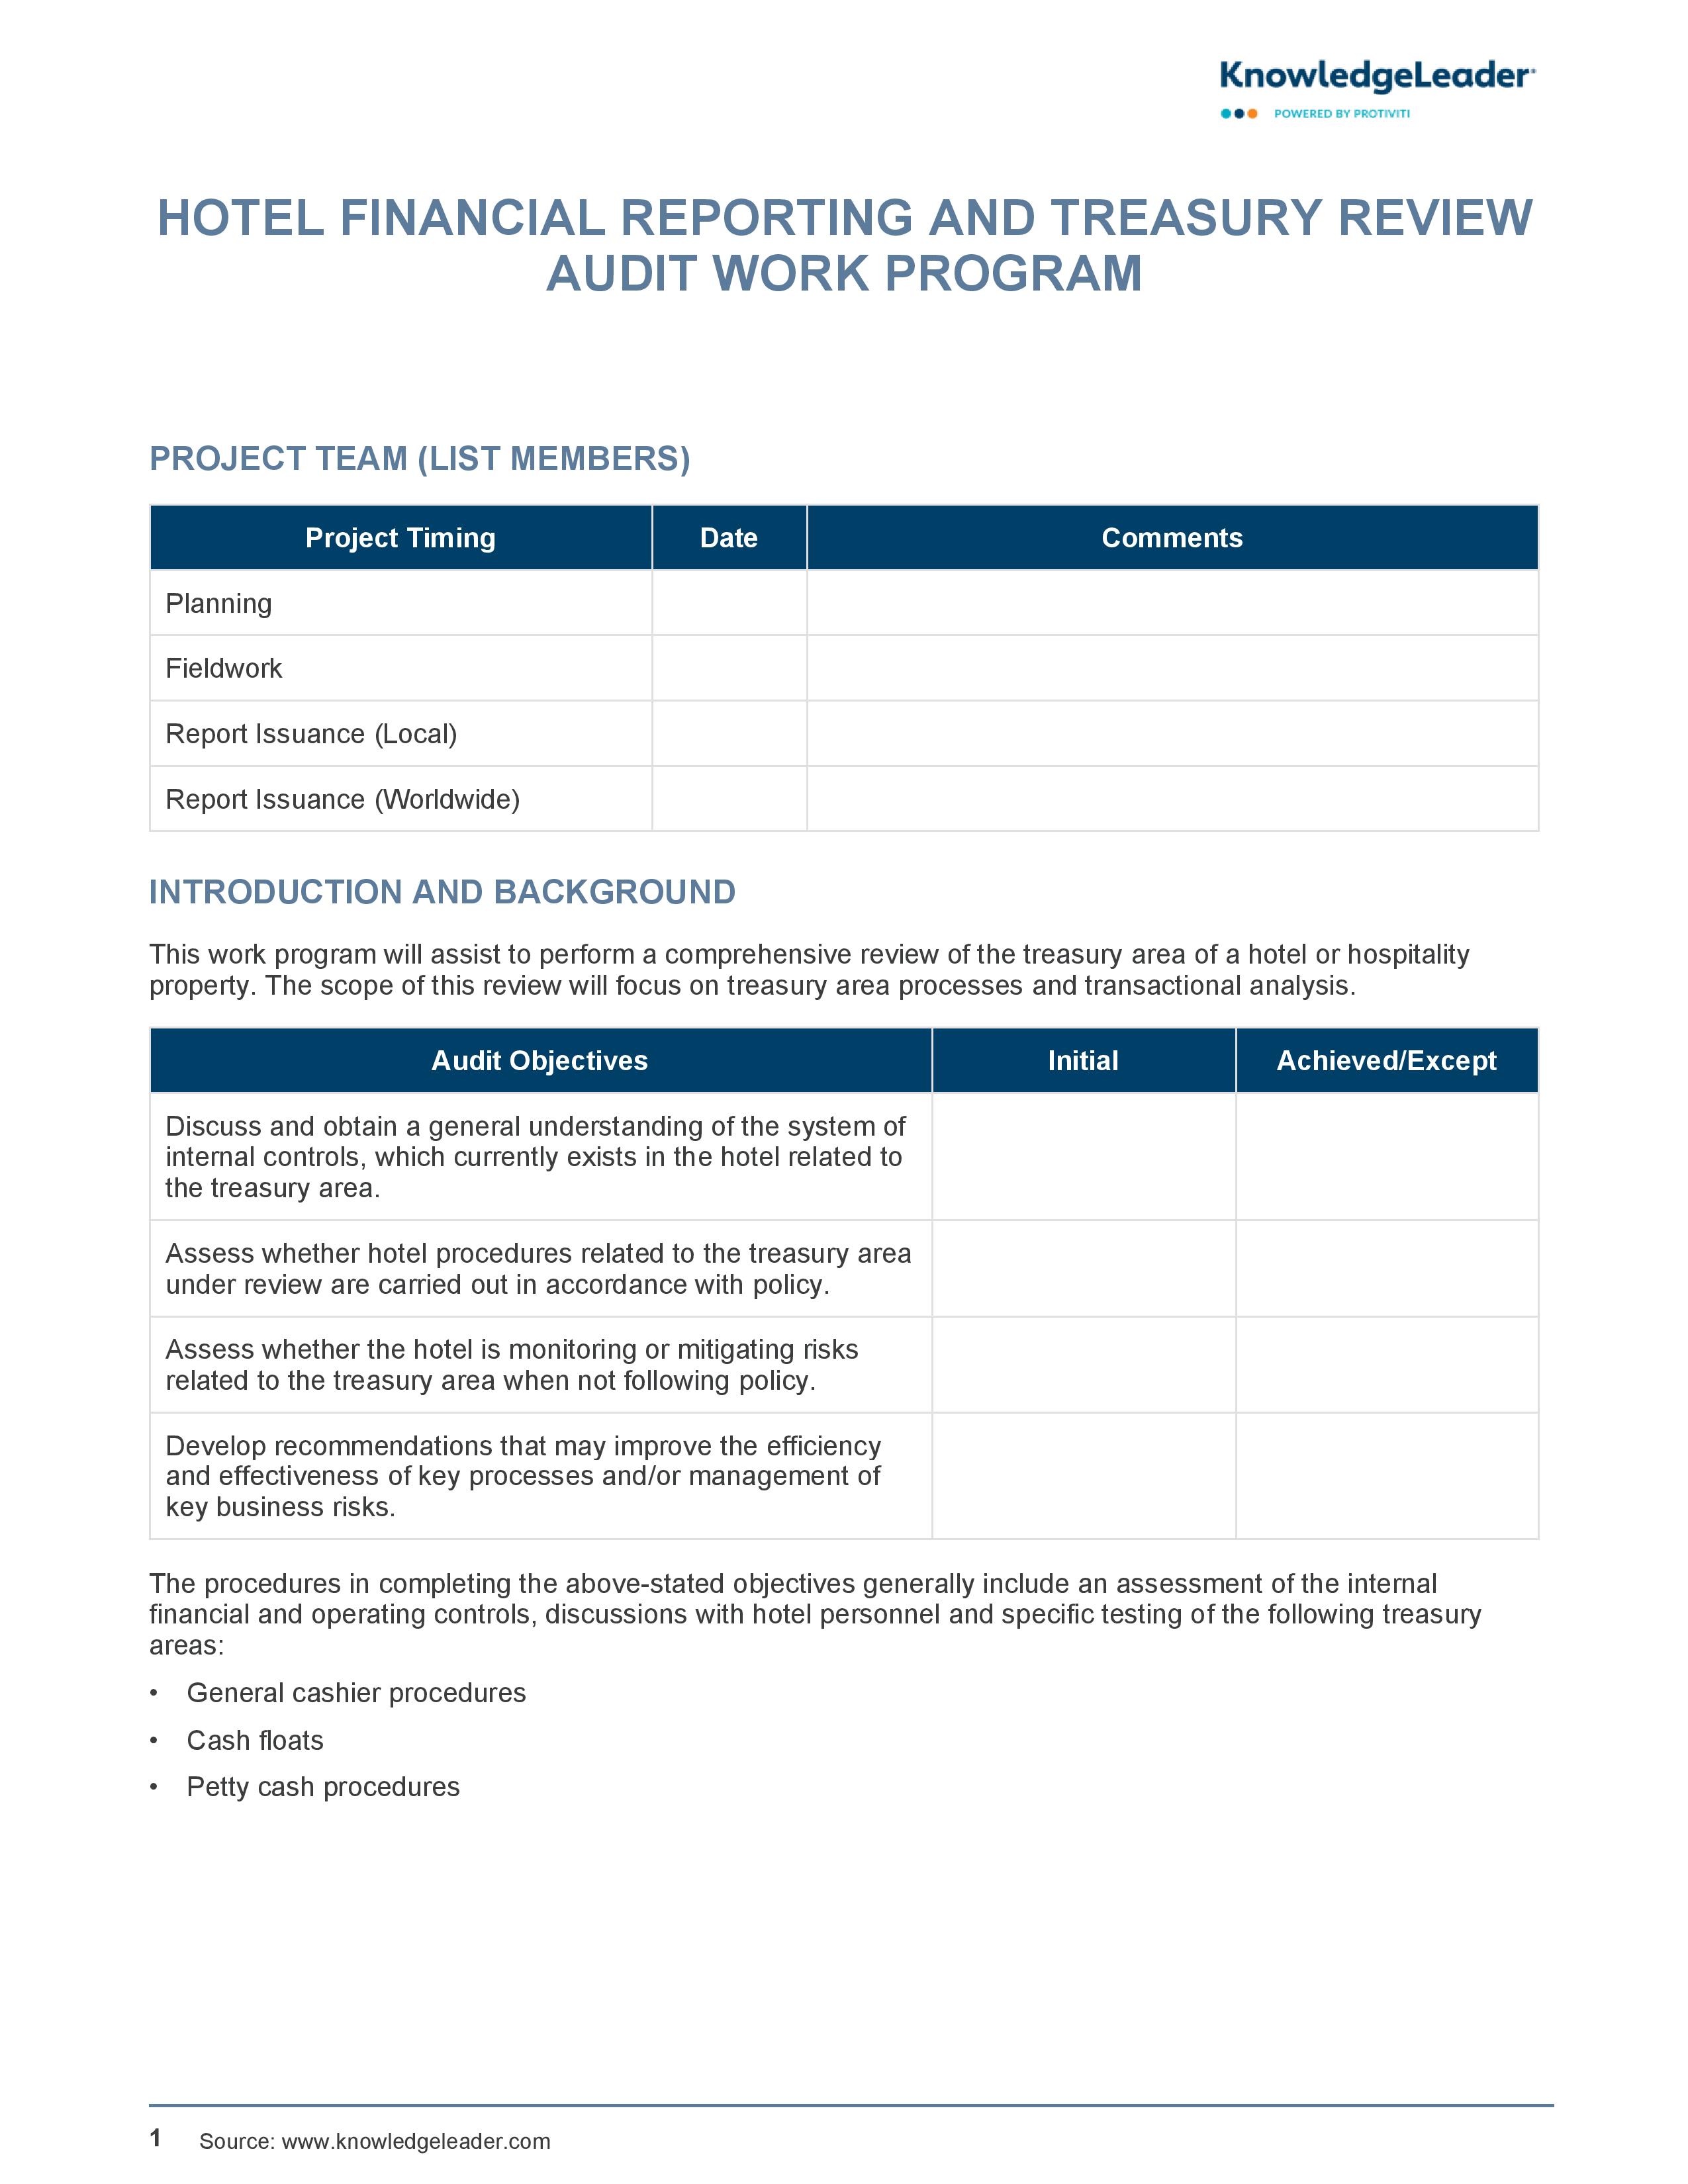 Screenshot of the first page of the Hotel Financial Reporting and Treasury Review Audit Work Program